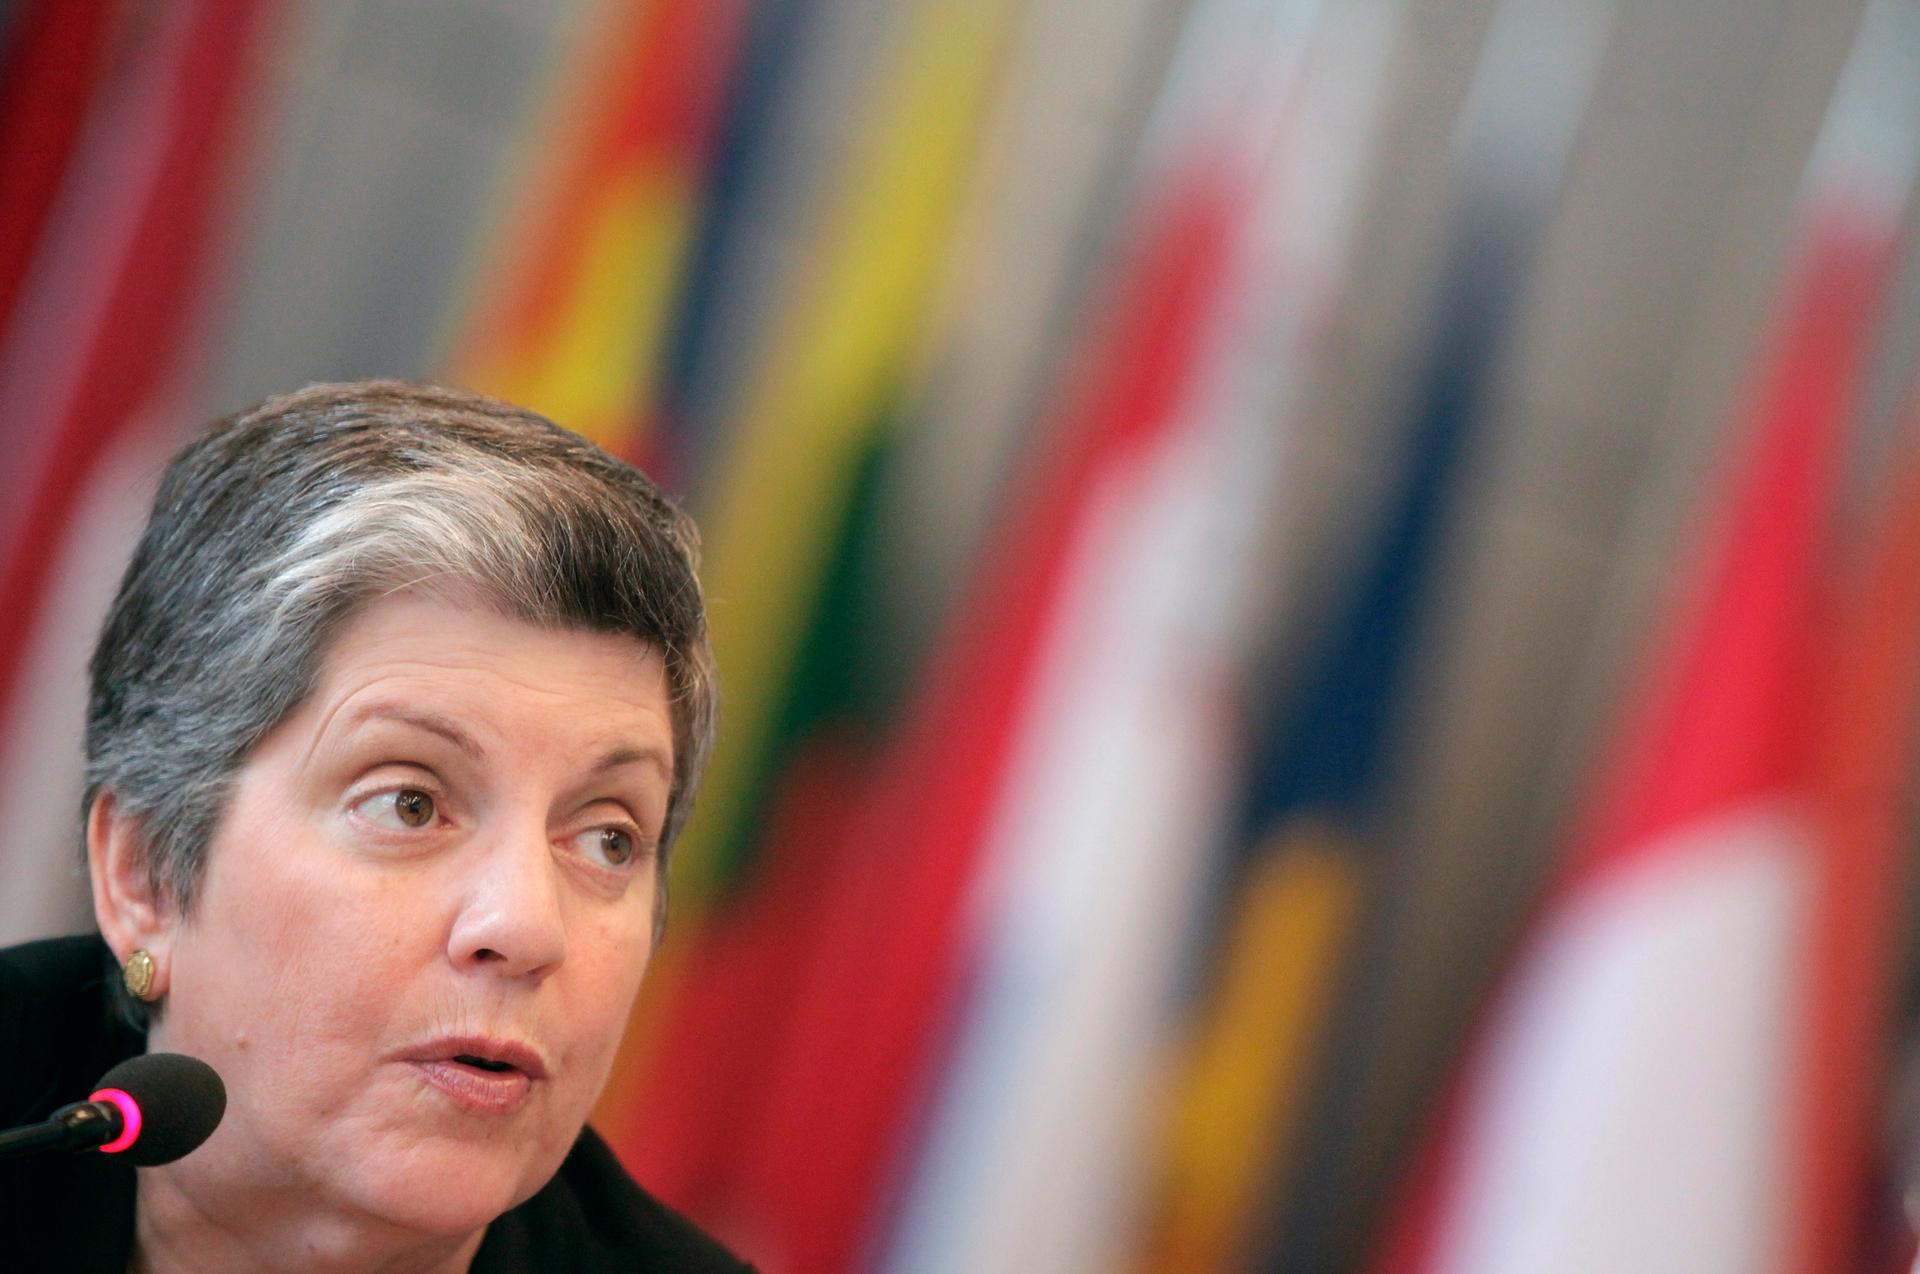 Janet Napolitano, former US Secretary of Homeland Security, in 2011.